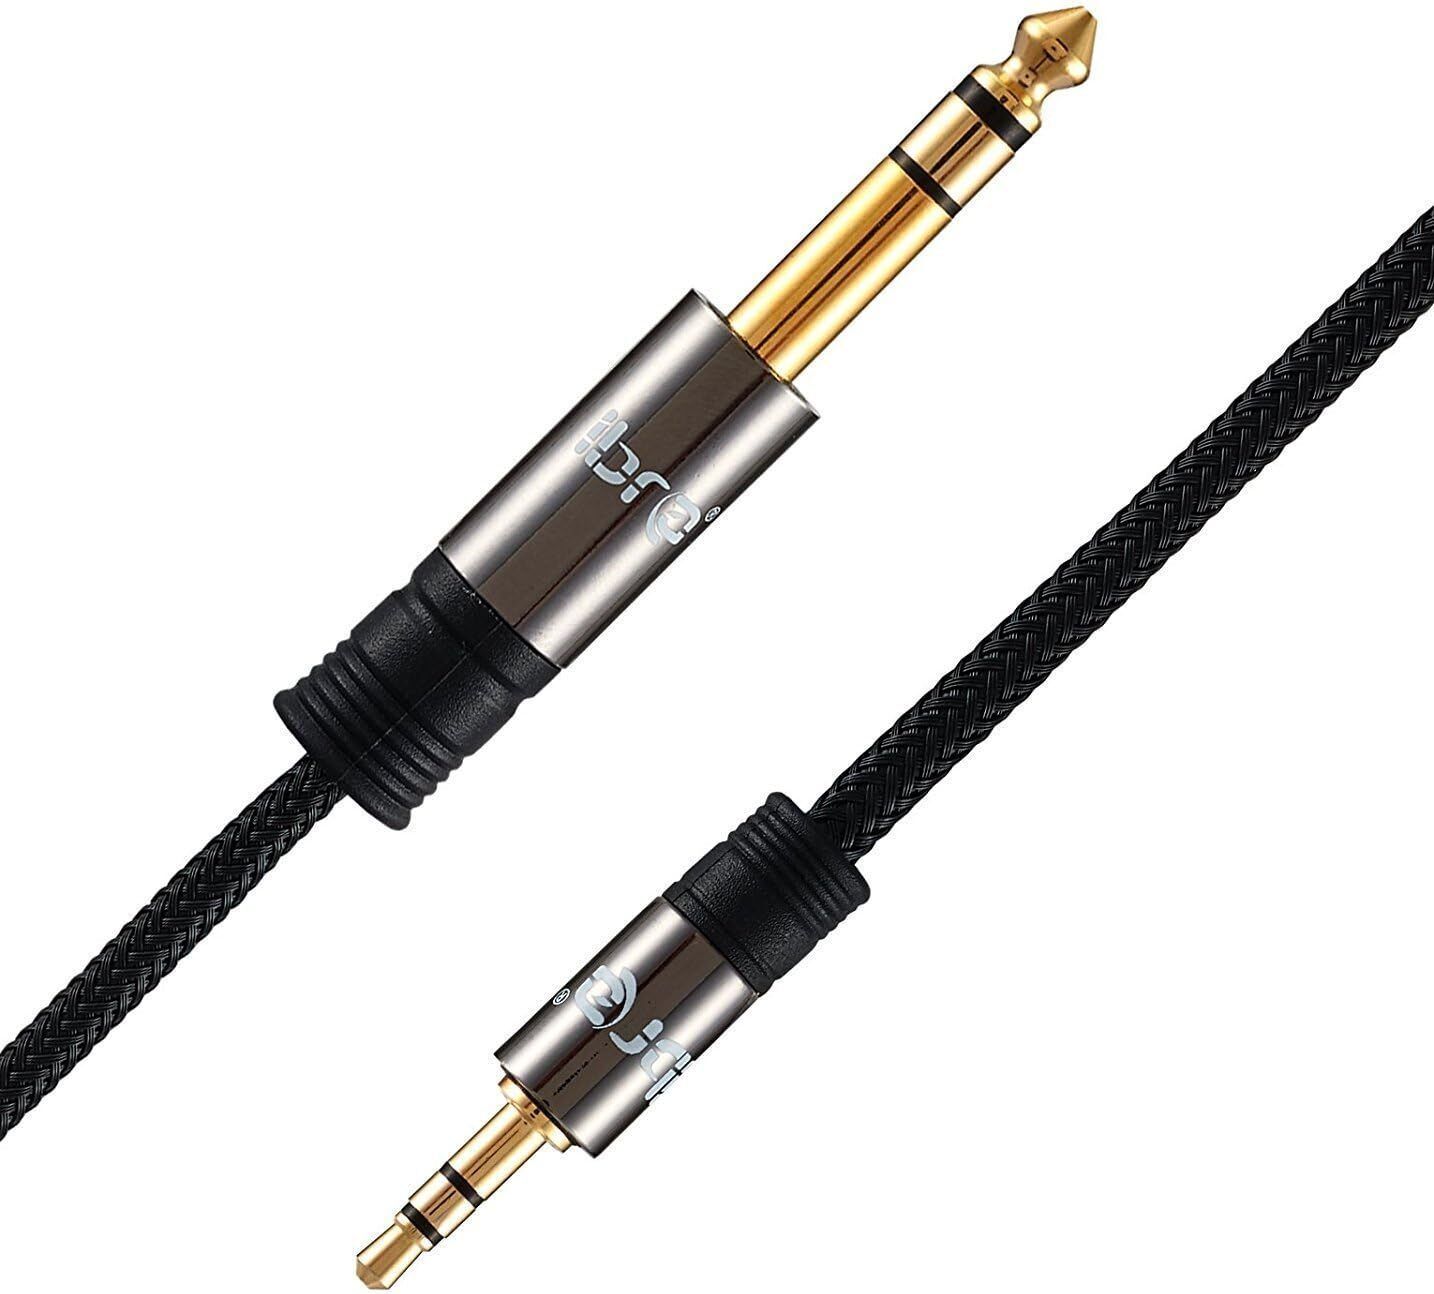 3.5mm to 6.35mm 1/4 inch Small to Big Mono Jack Audio Cable Plug Patch Lead Amp - 1.5M